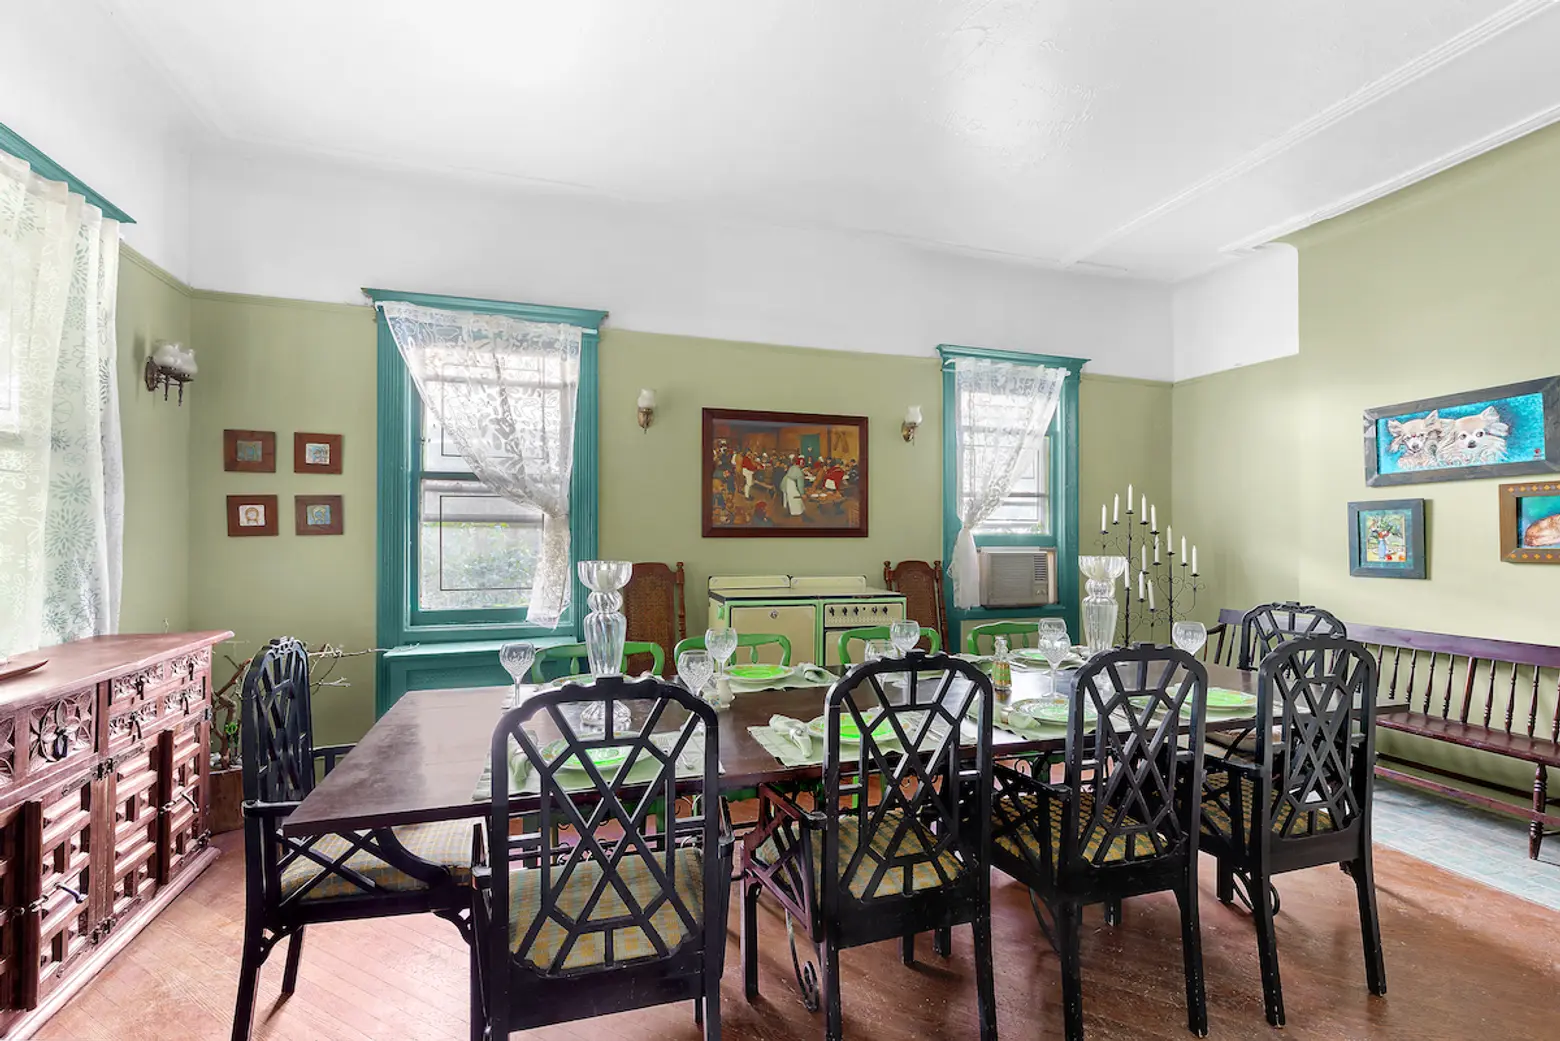 899 East 18th Street, midwood, cool listings, townhouses